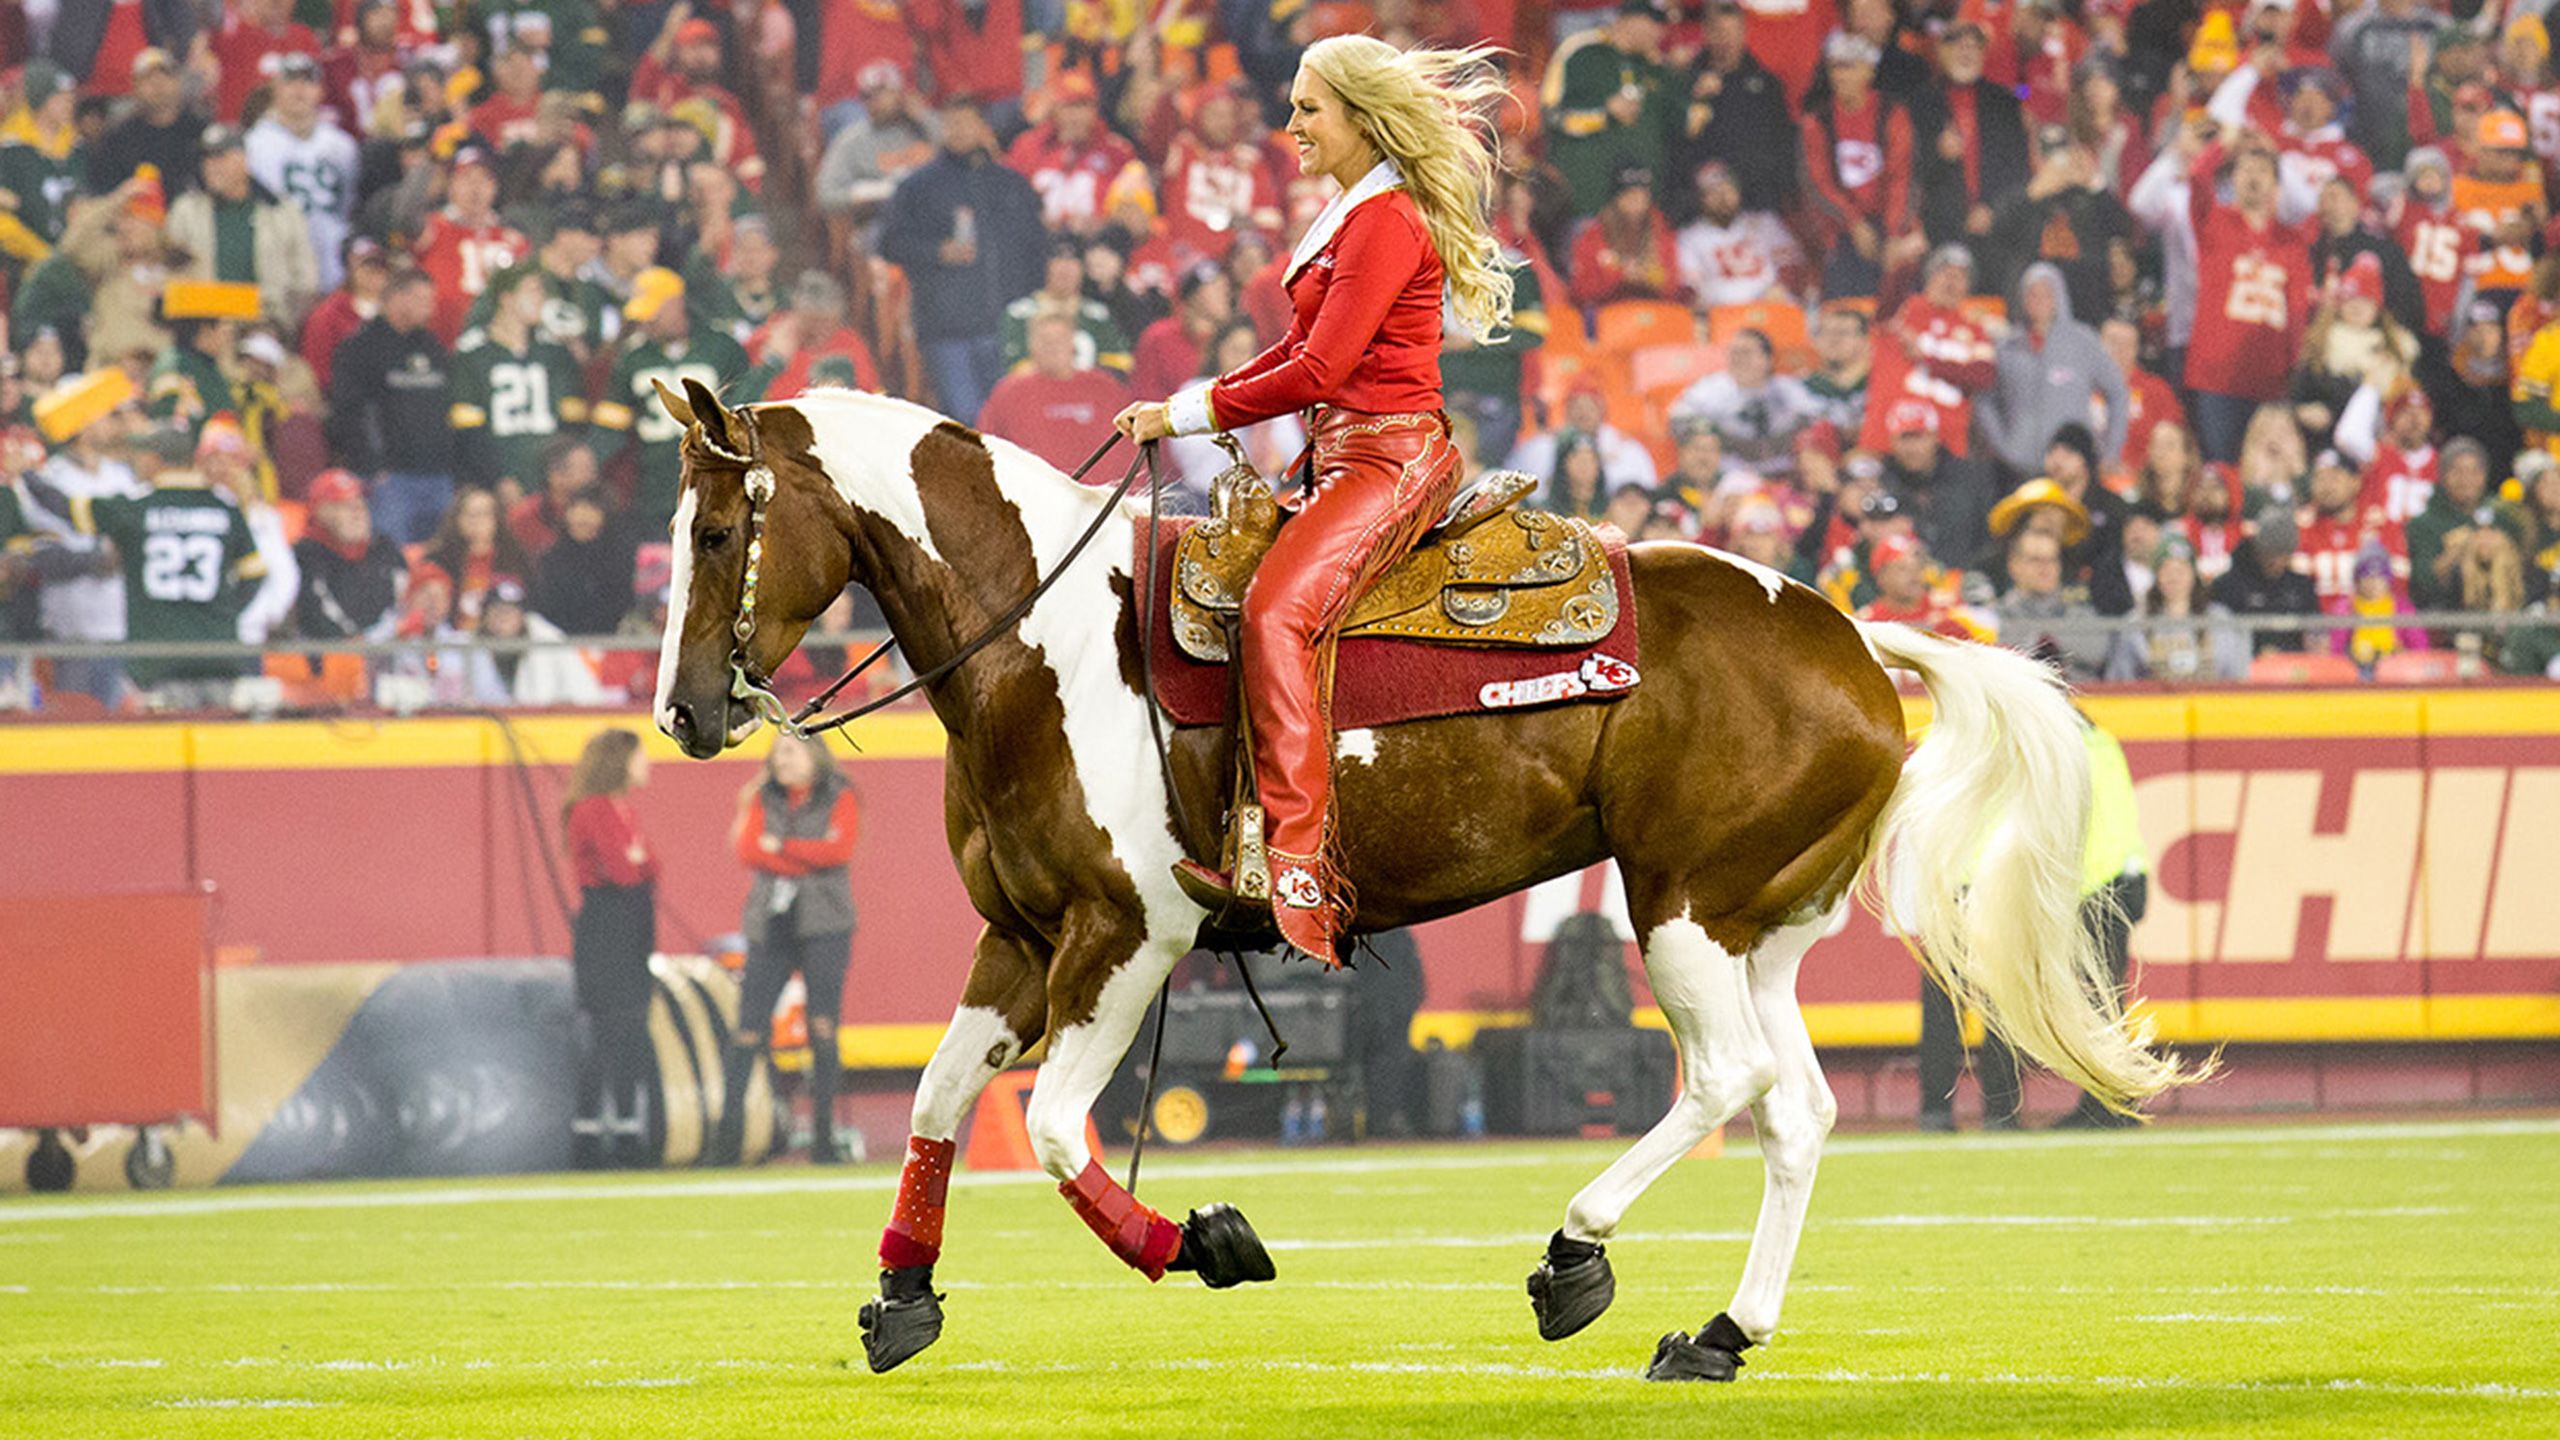 Chiefs Mascot / Kansas City Chiefs Mascot Seriously Injured During Practice At Arrowhead Sports